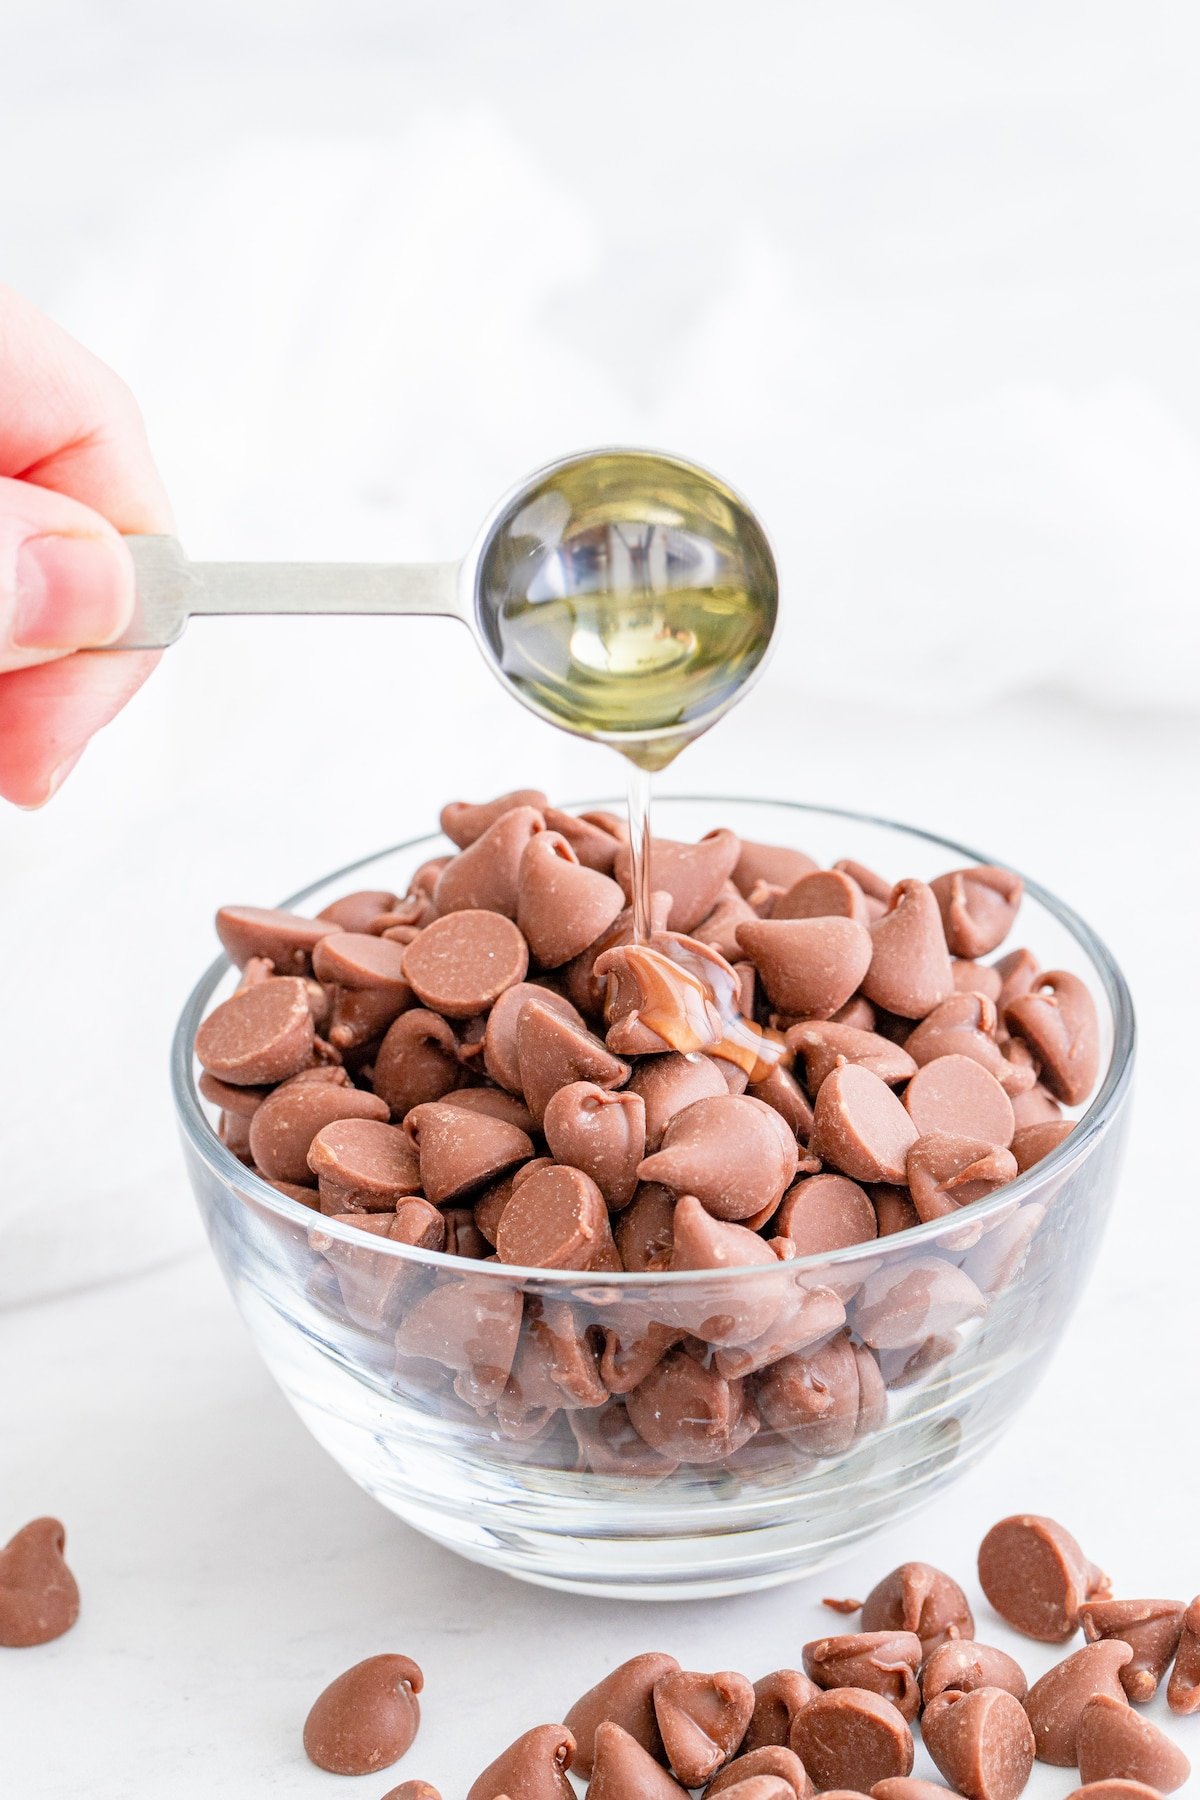 Teaspoon of oil being poured into a bowl of milk chocolate chips